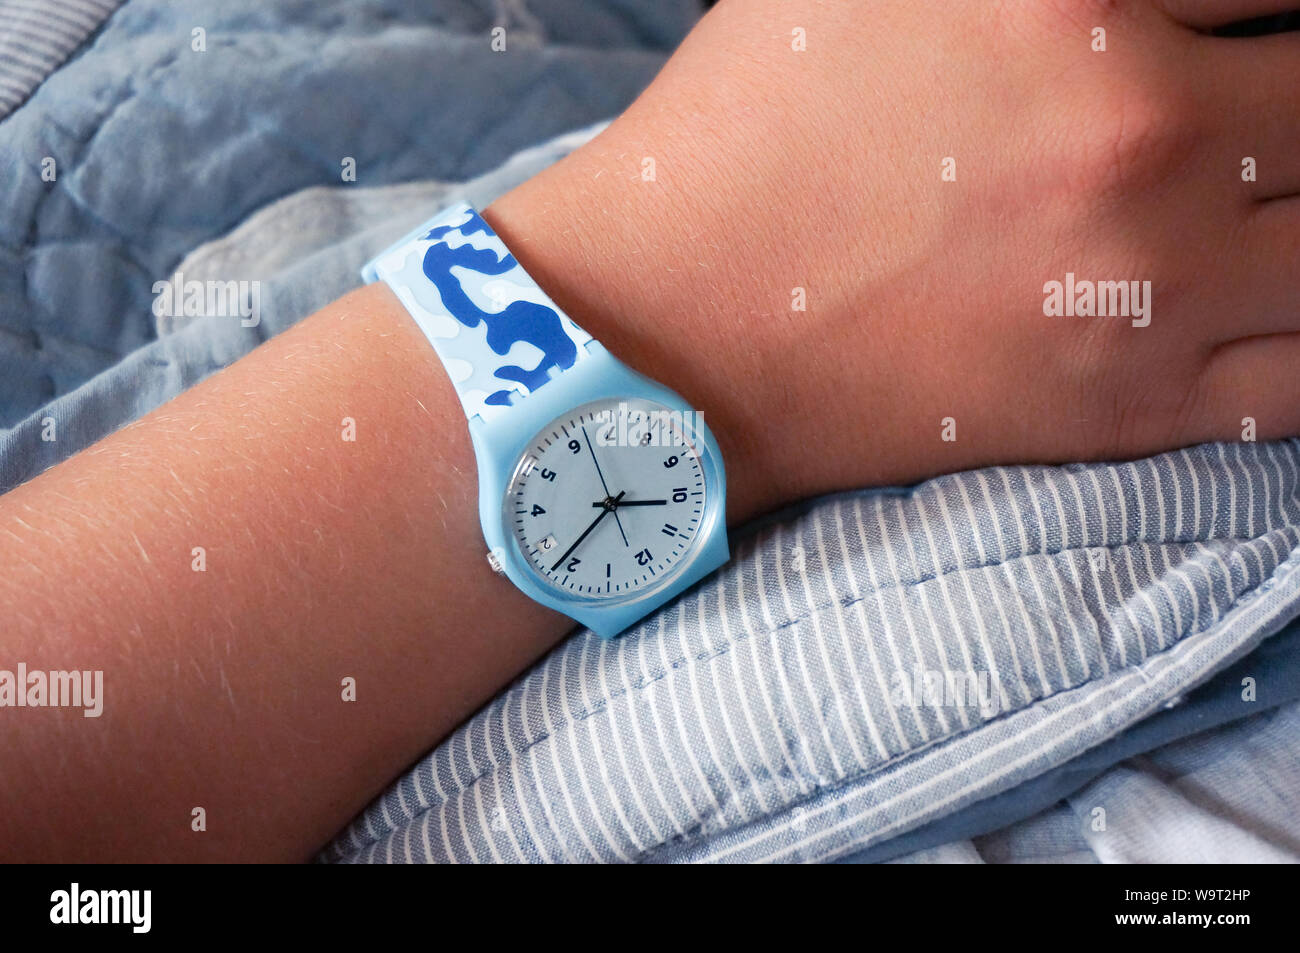 Alicante, Spain - August, 2019: Blue rubber Swatch watch on wrist Stock Photo